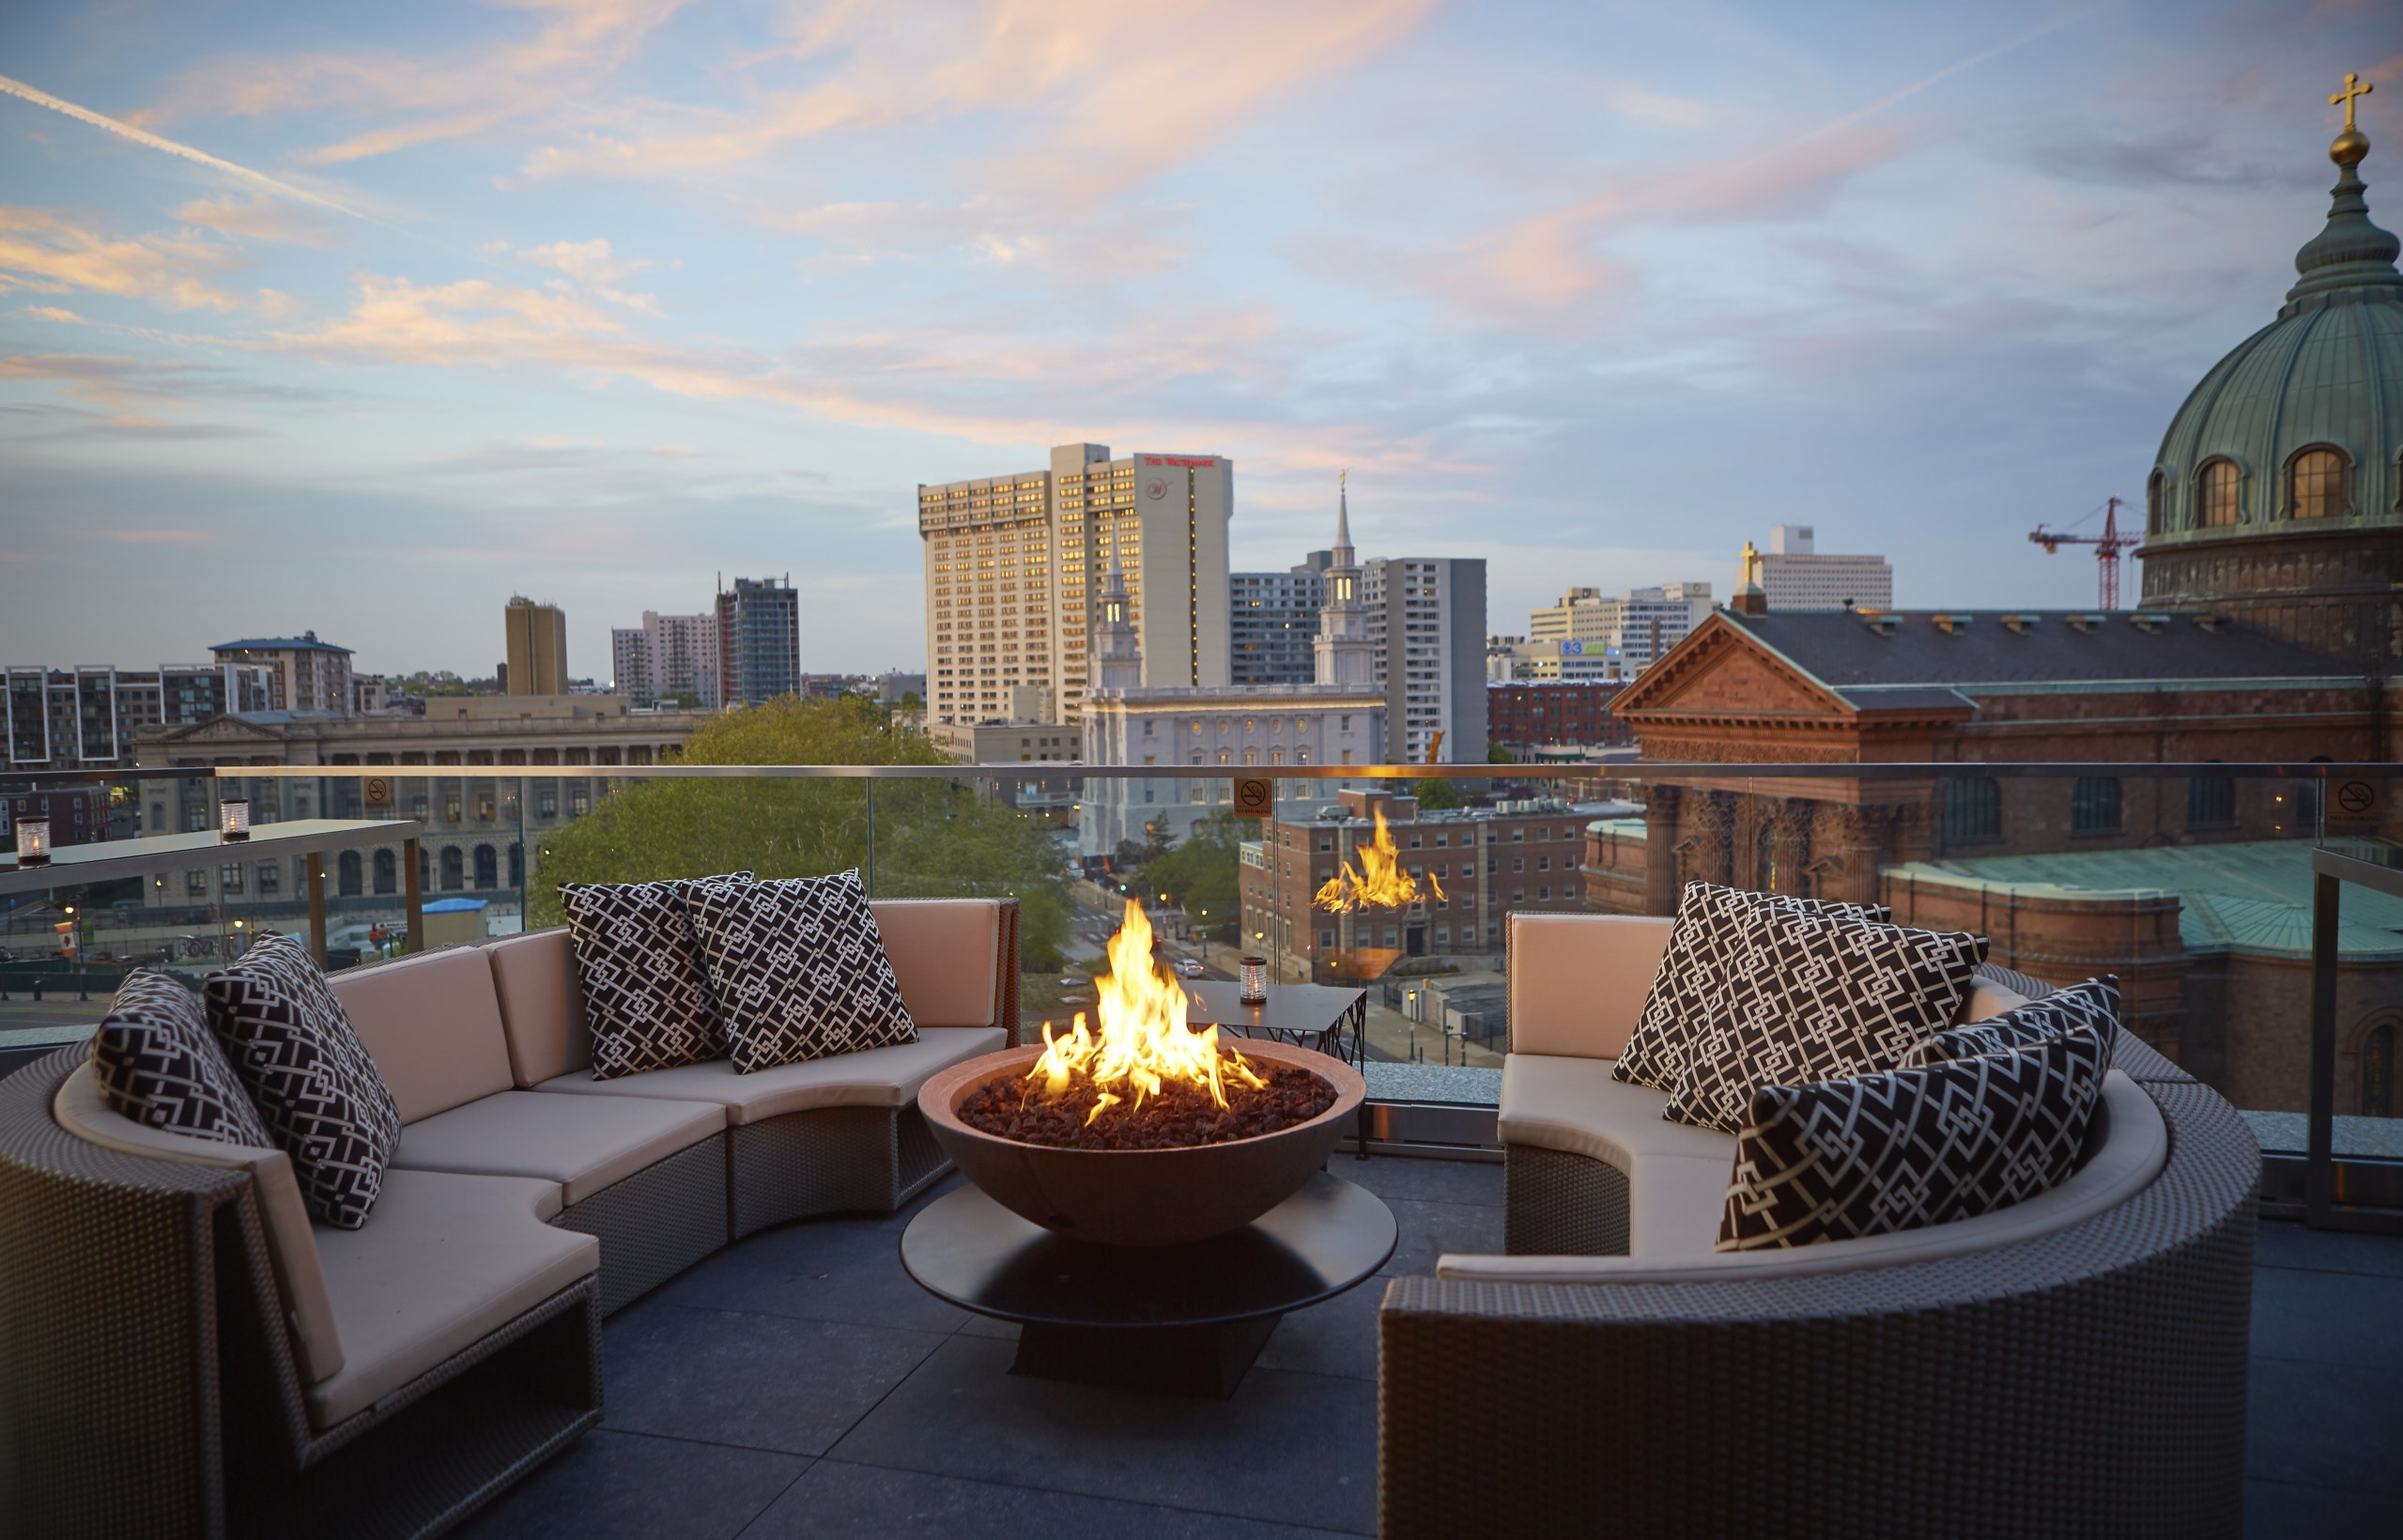 Assembly Rooftop bar and lounge overlooking the Cathedral Basilica of Saints Peter and Paul